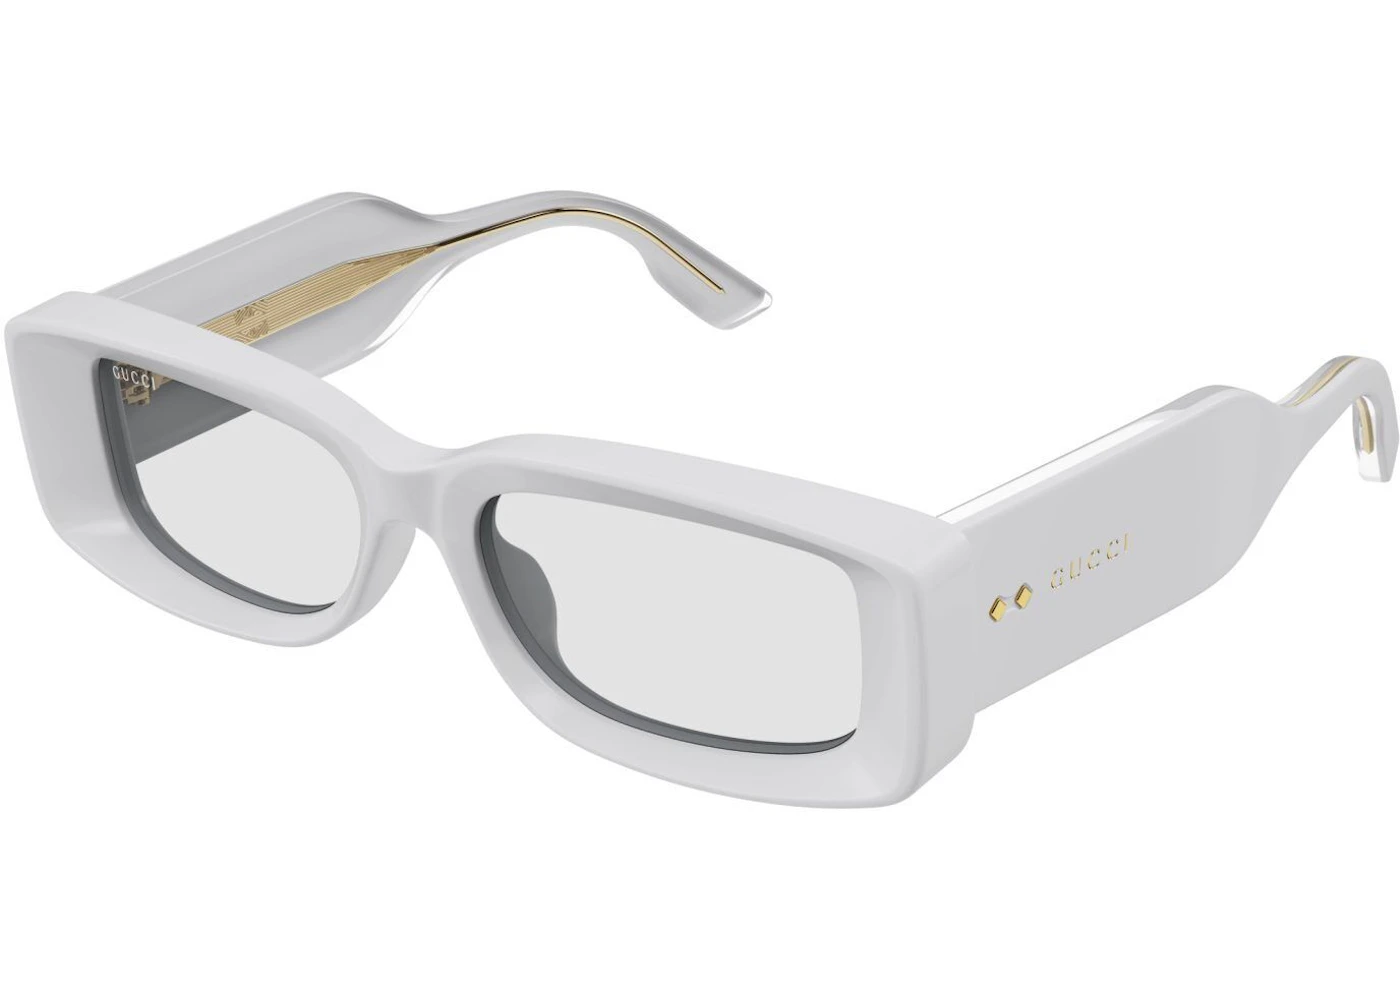 Gucci Rectangle Sunglasses White/Grey (GG1528S-001) in Acetate/Metal - US